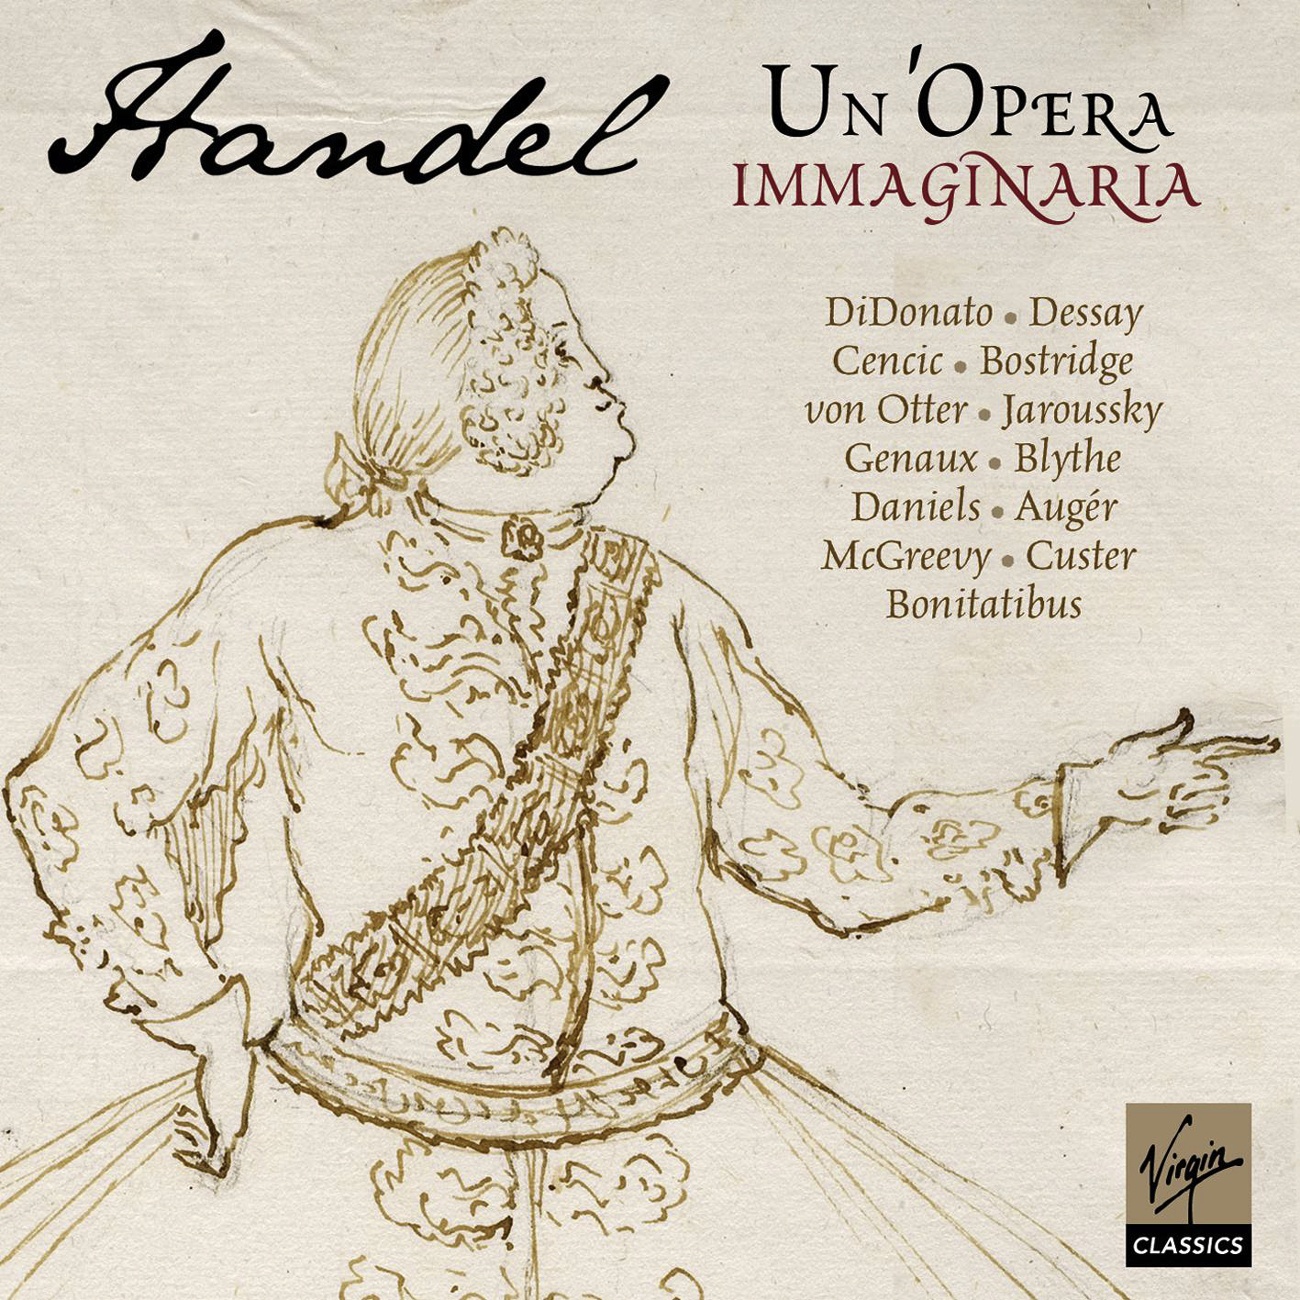 Alcina - Opera in three acts HWV34 (libretto after an episode from 'Orlando furioso' by Ludovico Ariosto) (performing edition by Clifford Bartlett) (2006 Digital Remaster), Act I, Scene 2, Ballet: Sarabande